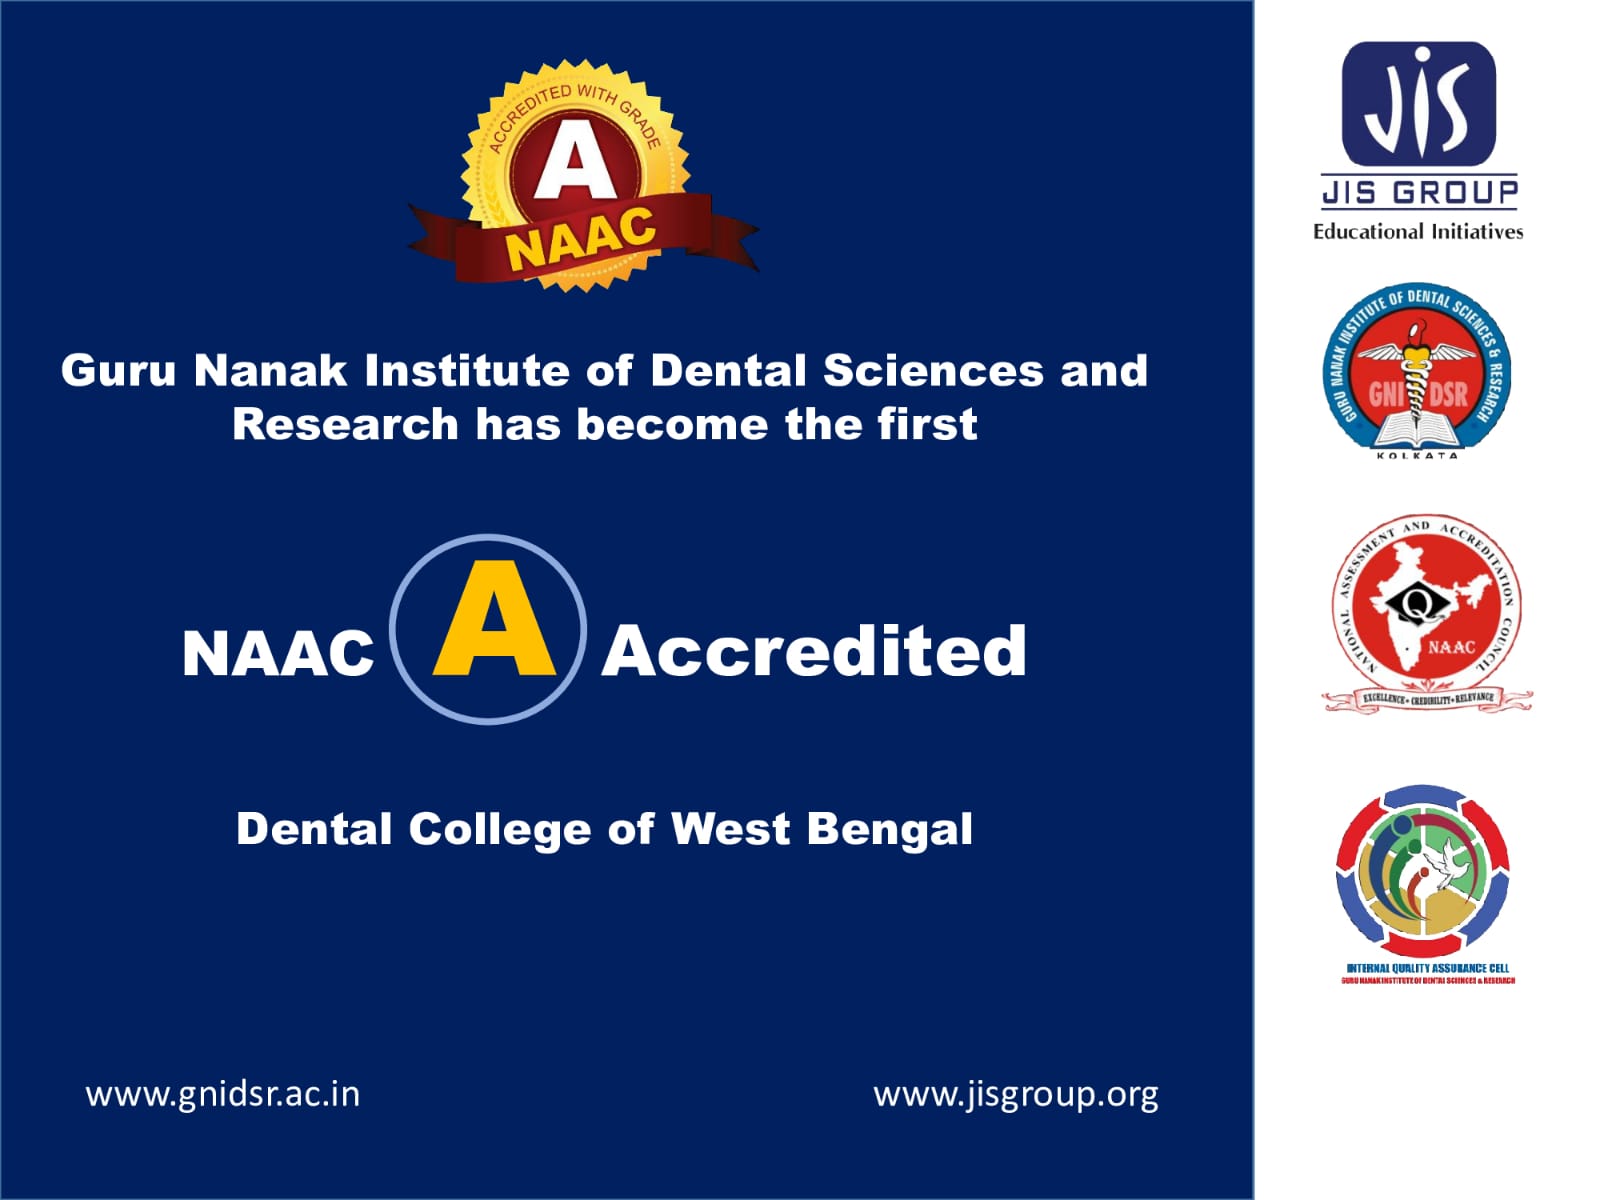 NAAC 'A' Accredited